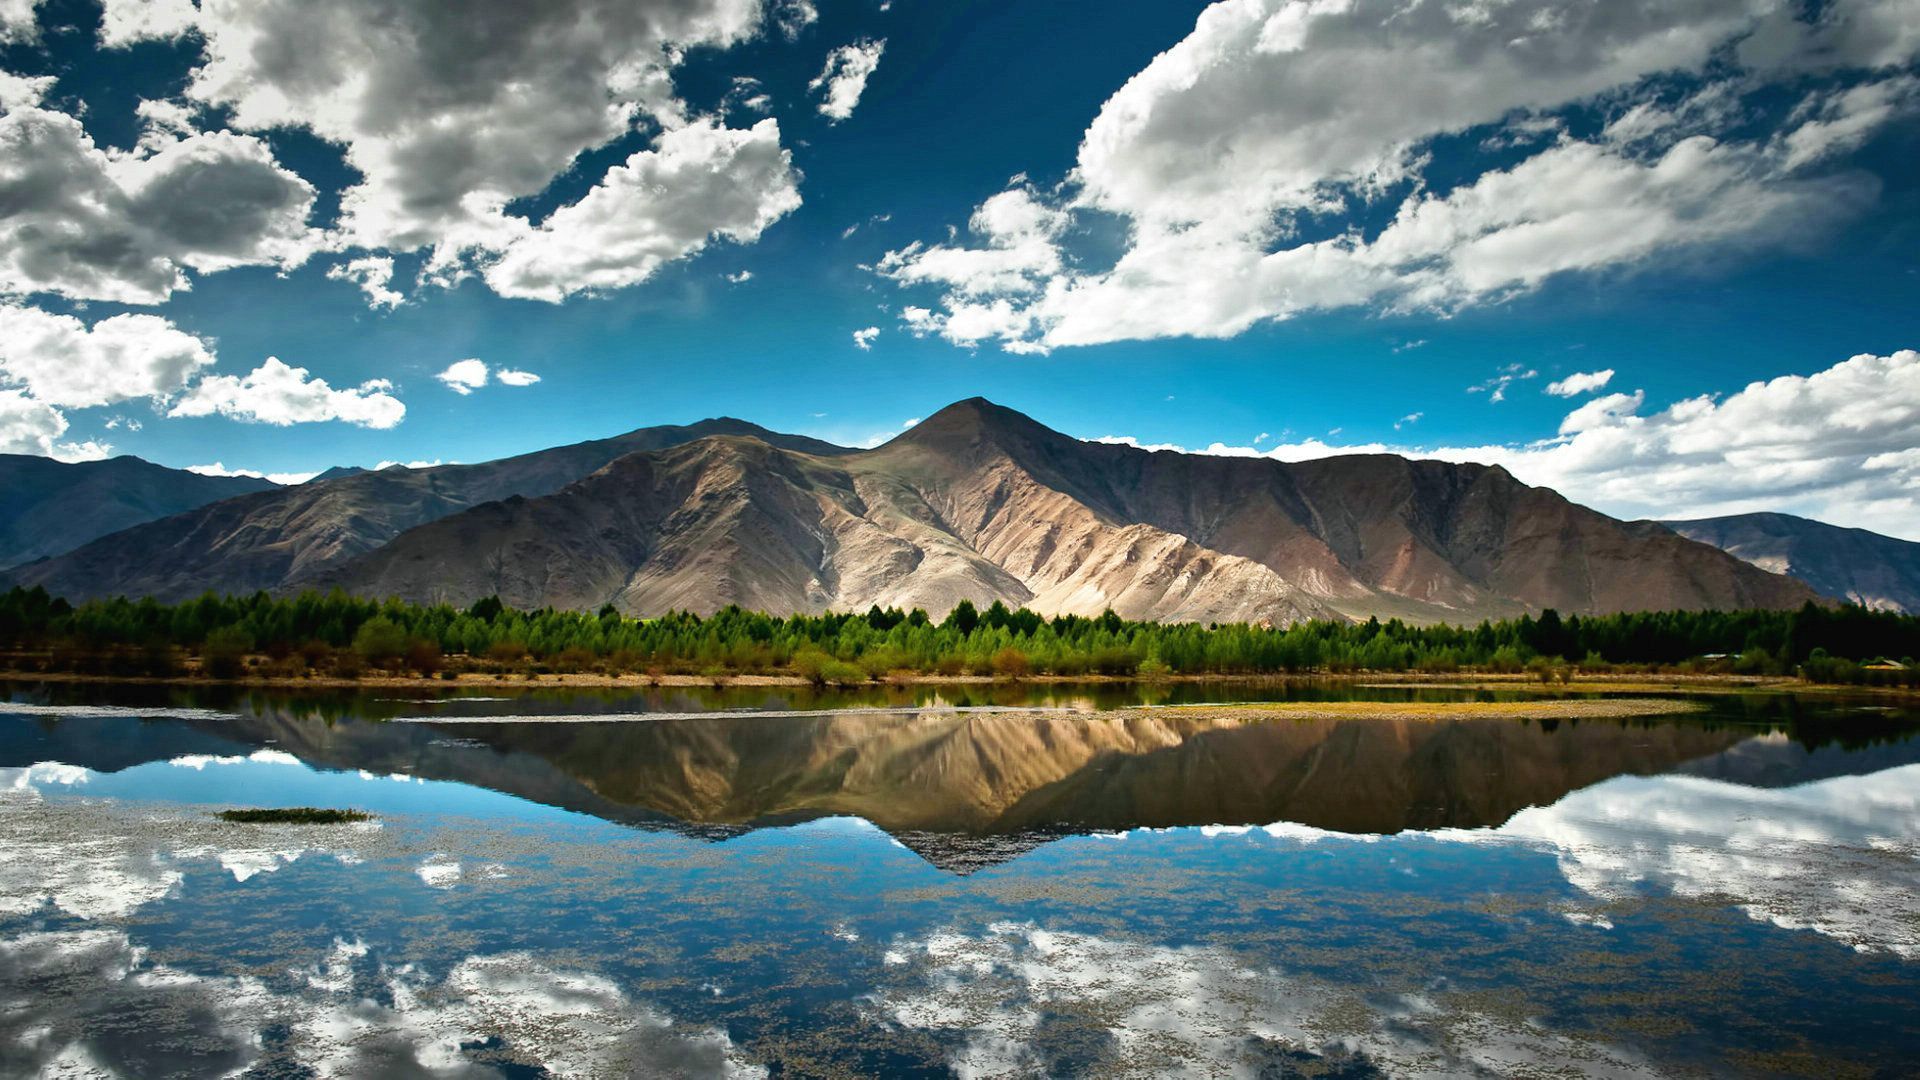 Wallpaper of the Week (#118) – A Tibet Lake | What's On My PC